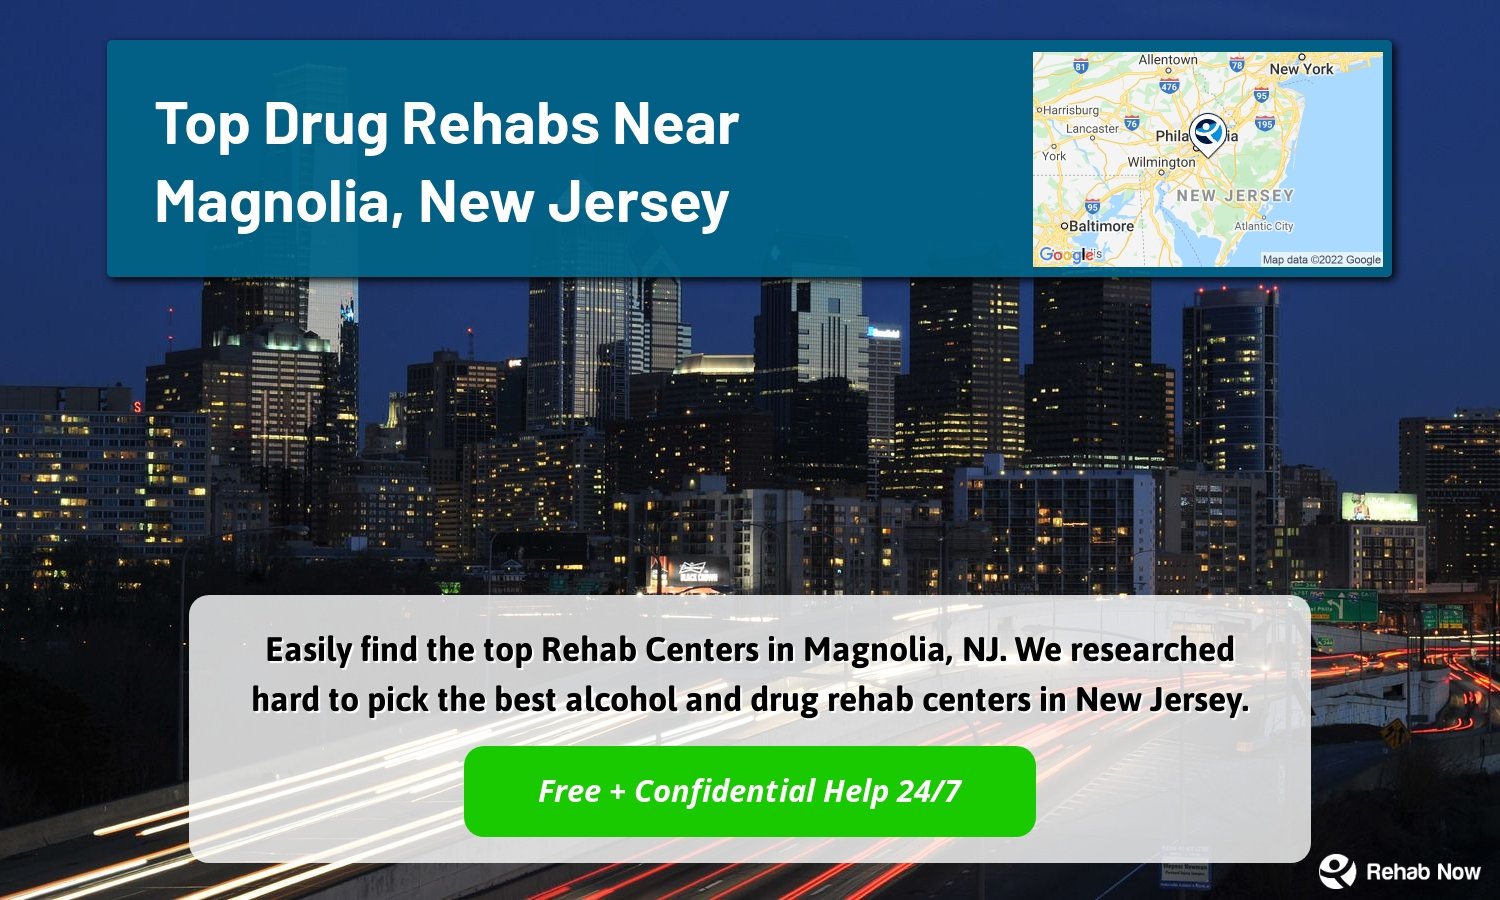 Easily find the top Rehab Centers in Magnolia, NJ. We researched hard to pick the best alcohol and drug rehab centers in New Jersey.